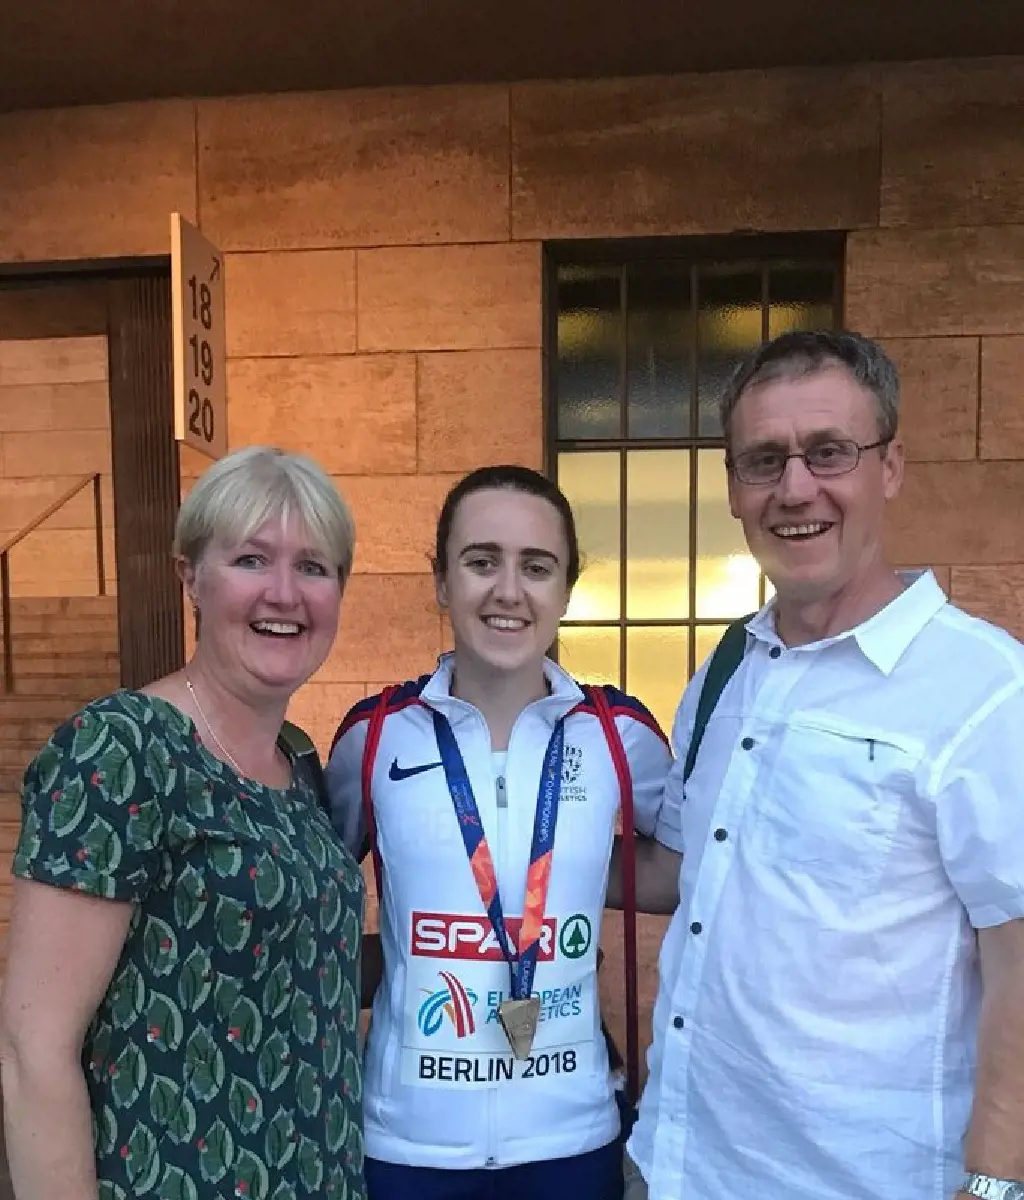 Laura Muir with her parents